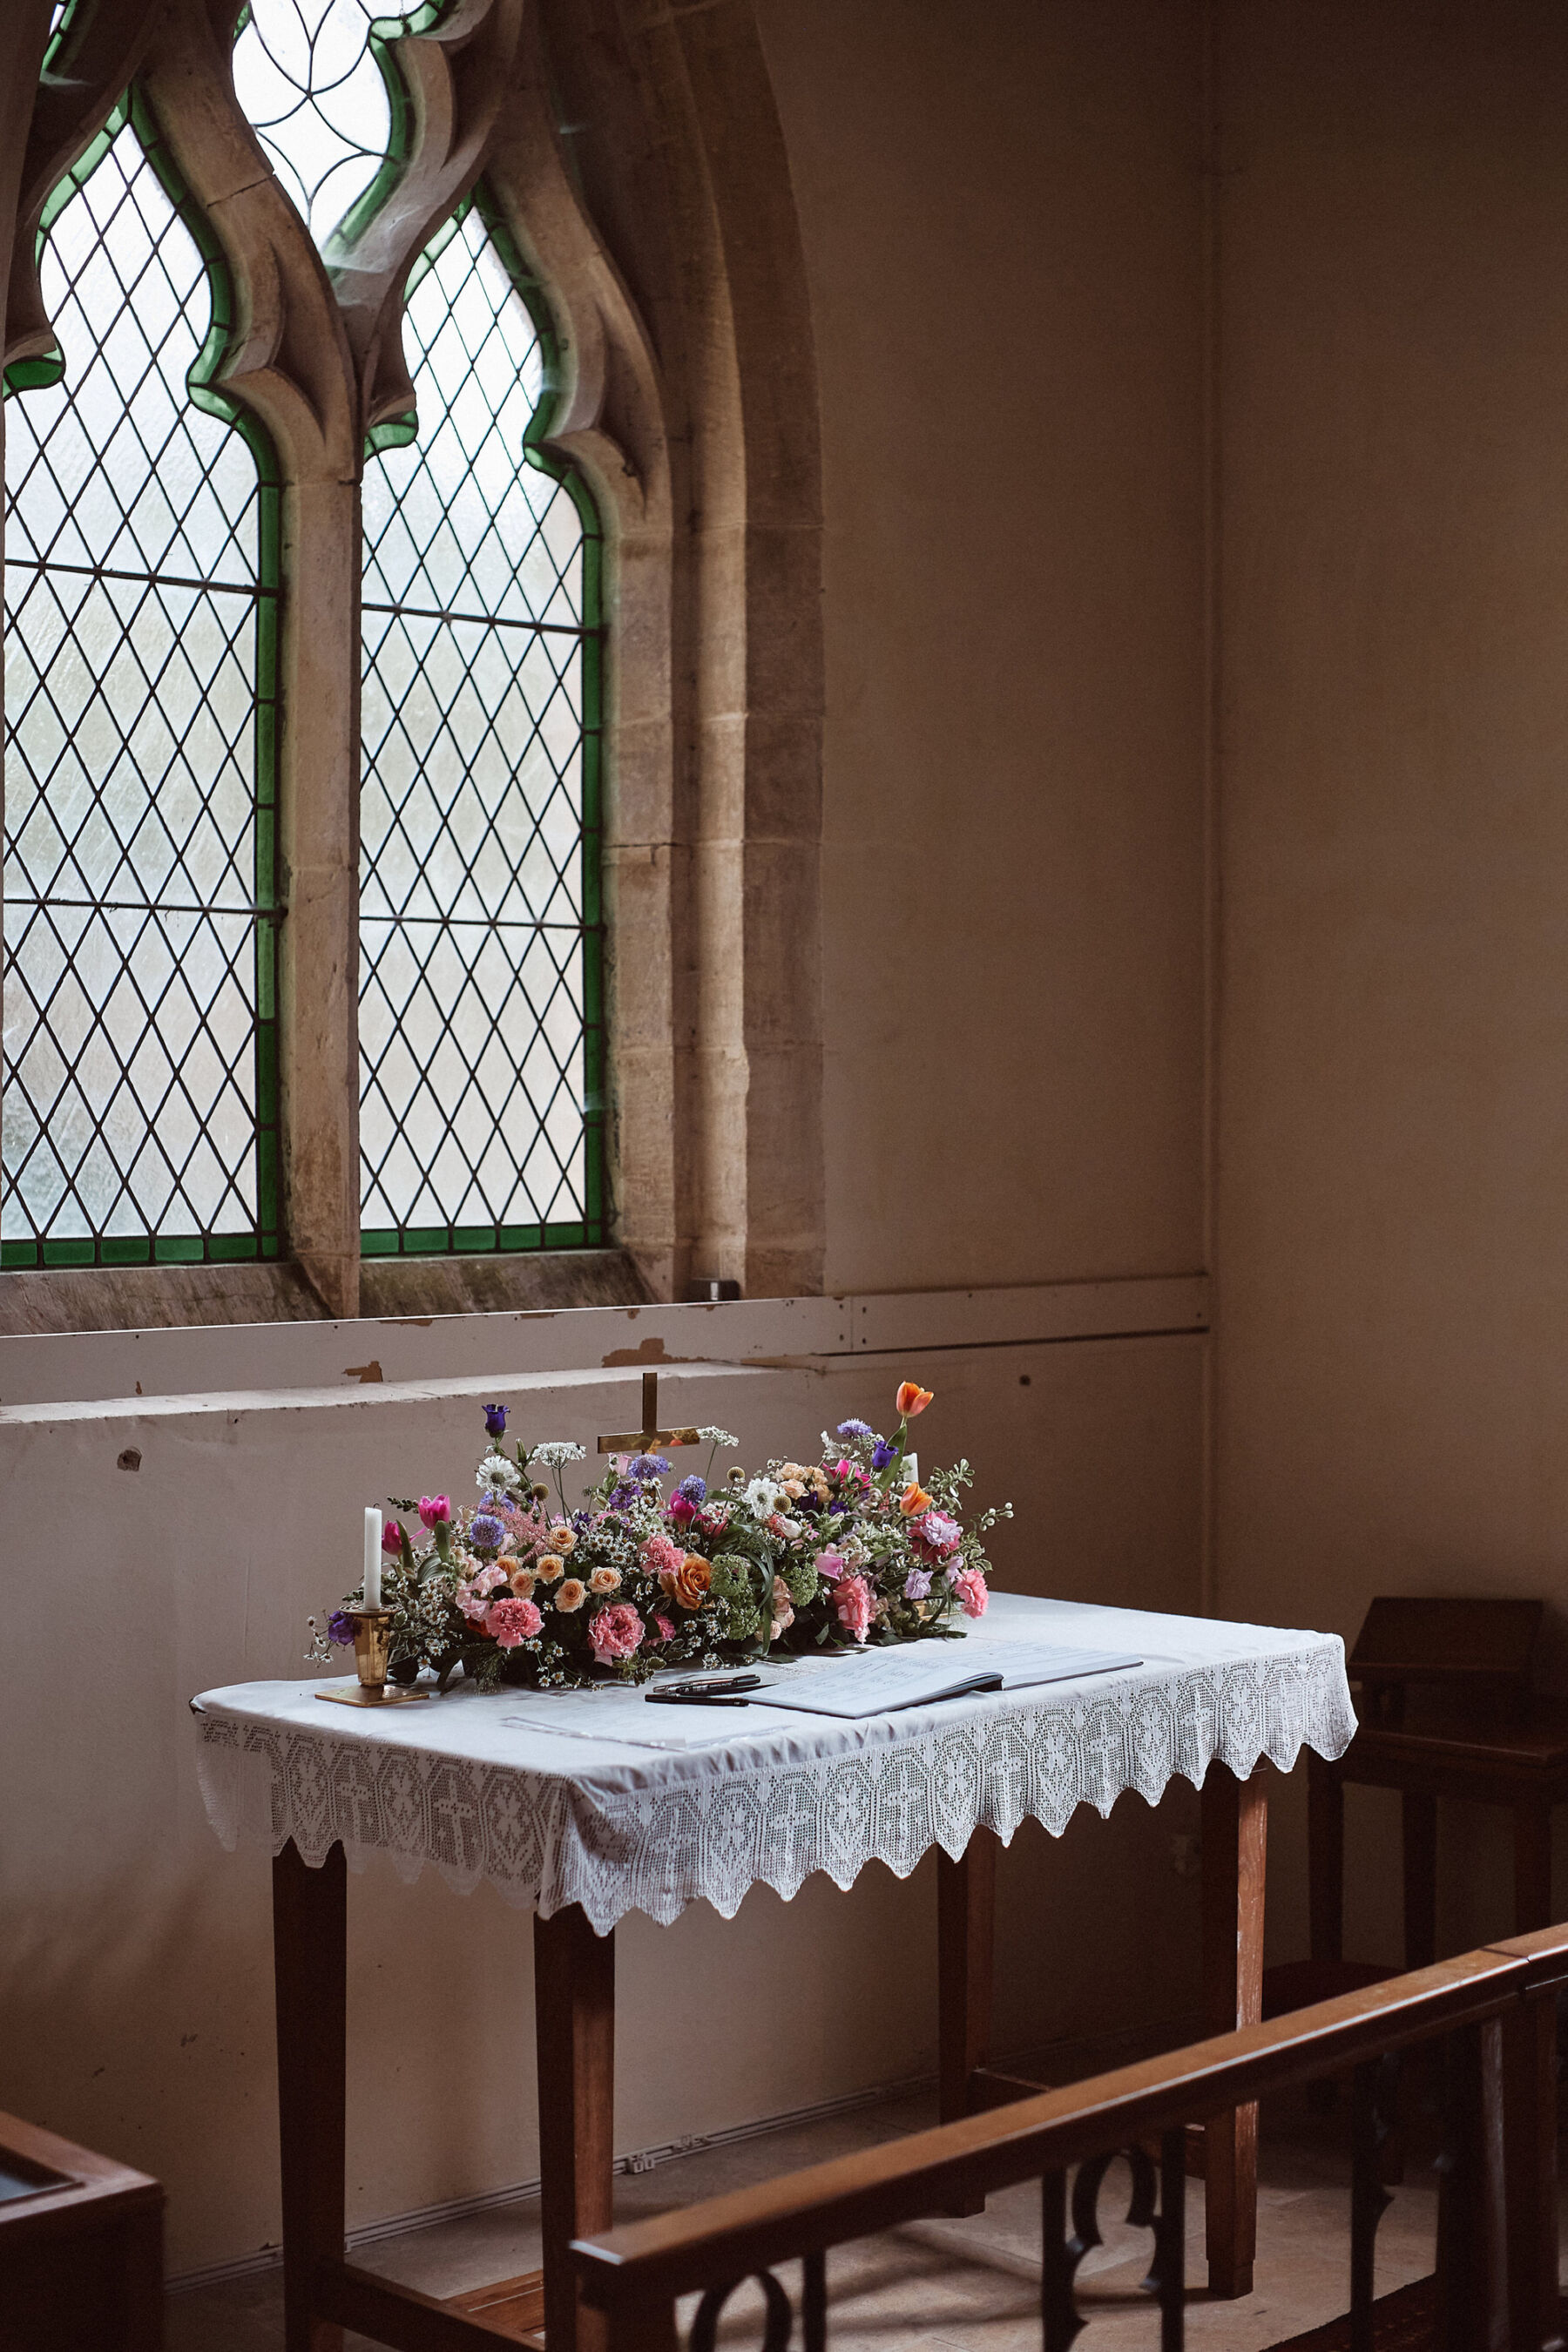 A long and low floral decoration for the registrar's table inside church.